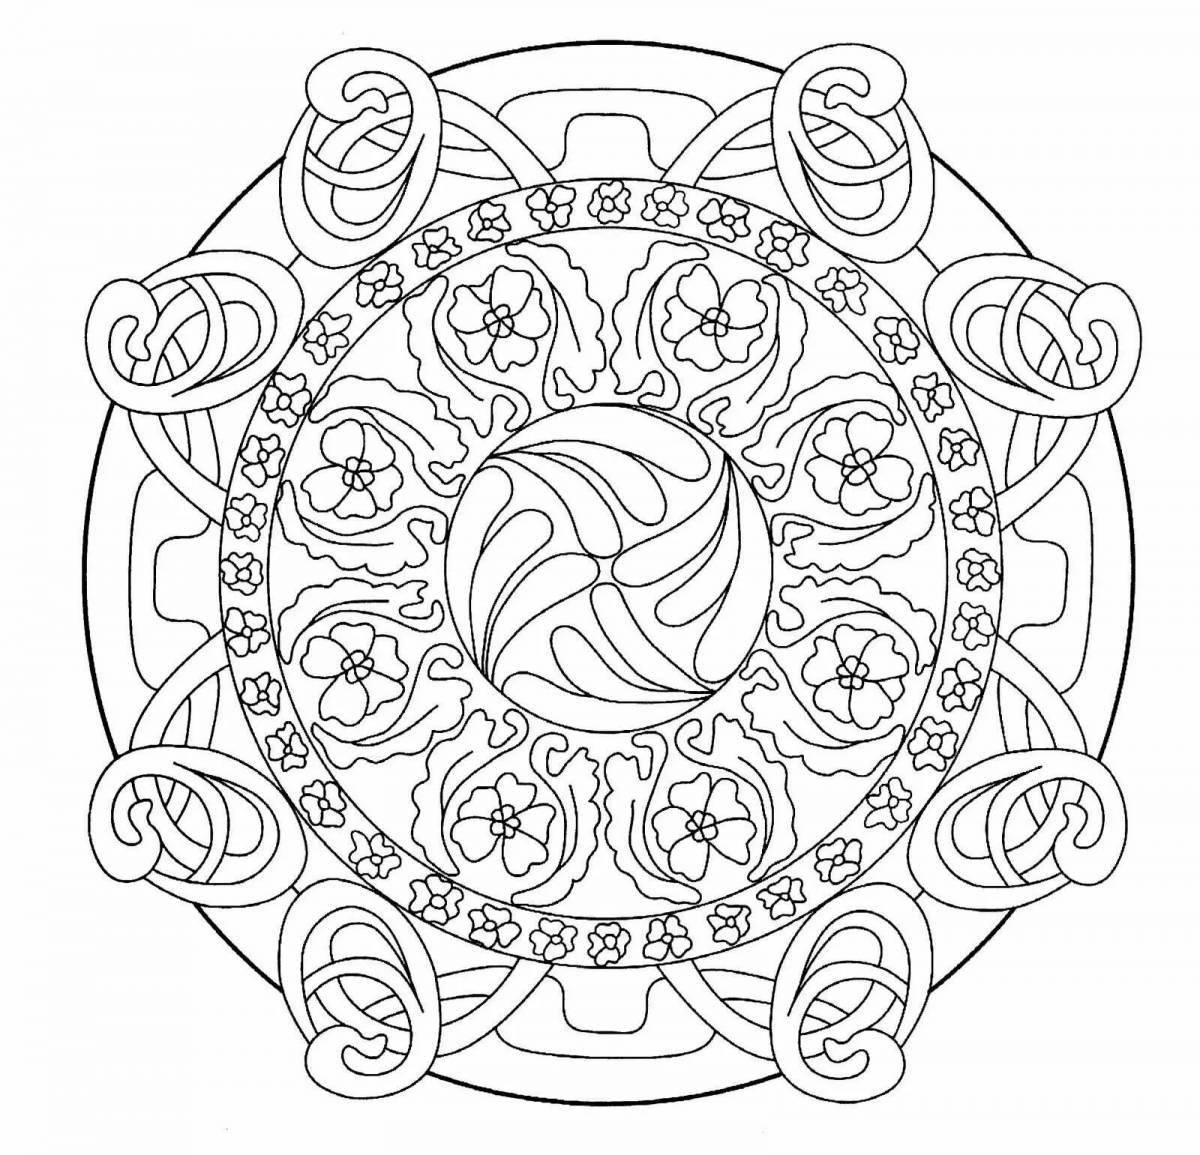 Exquisite health and wellness mandala coloring page